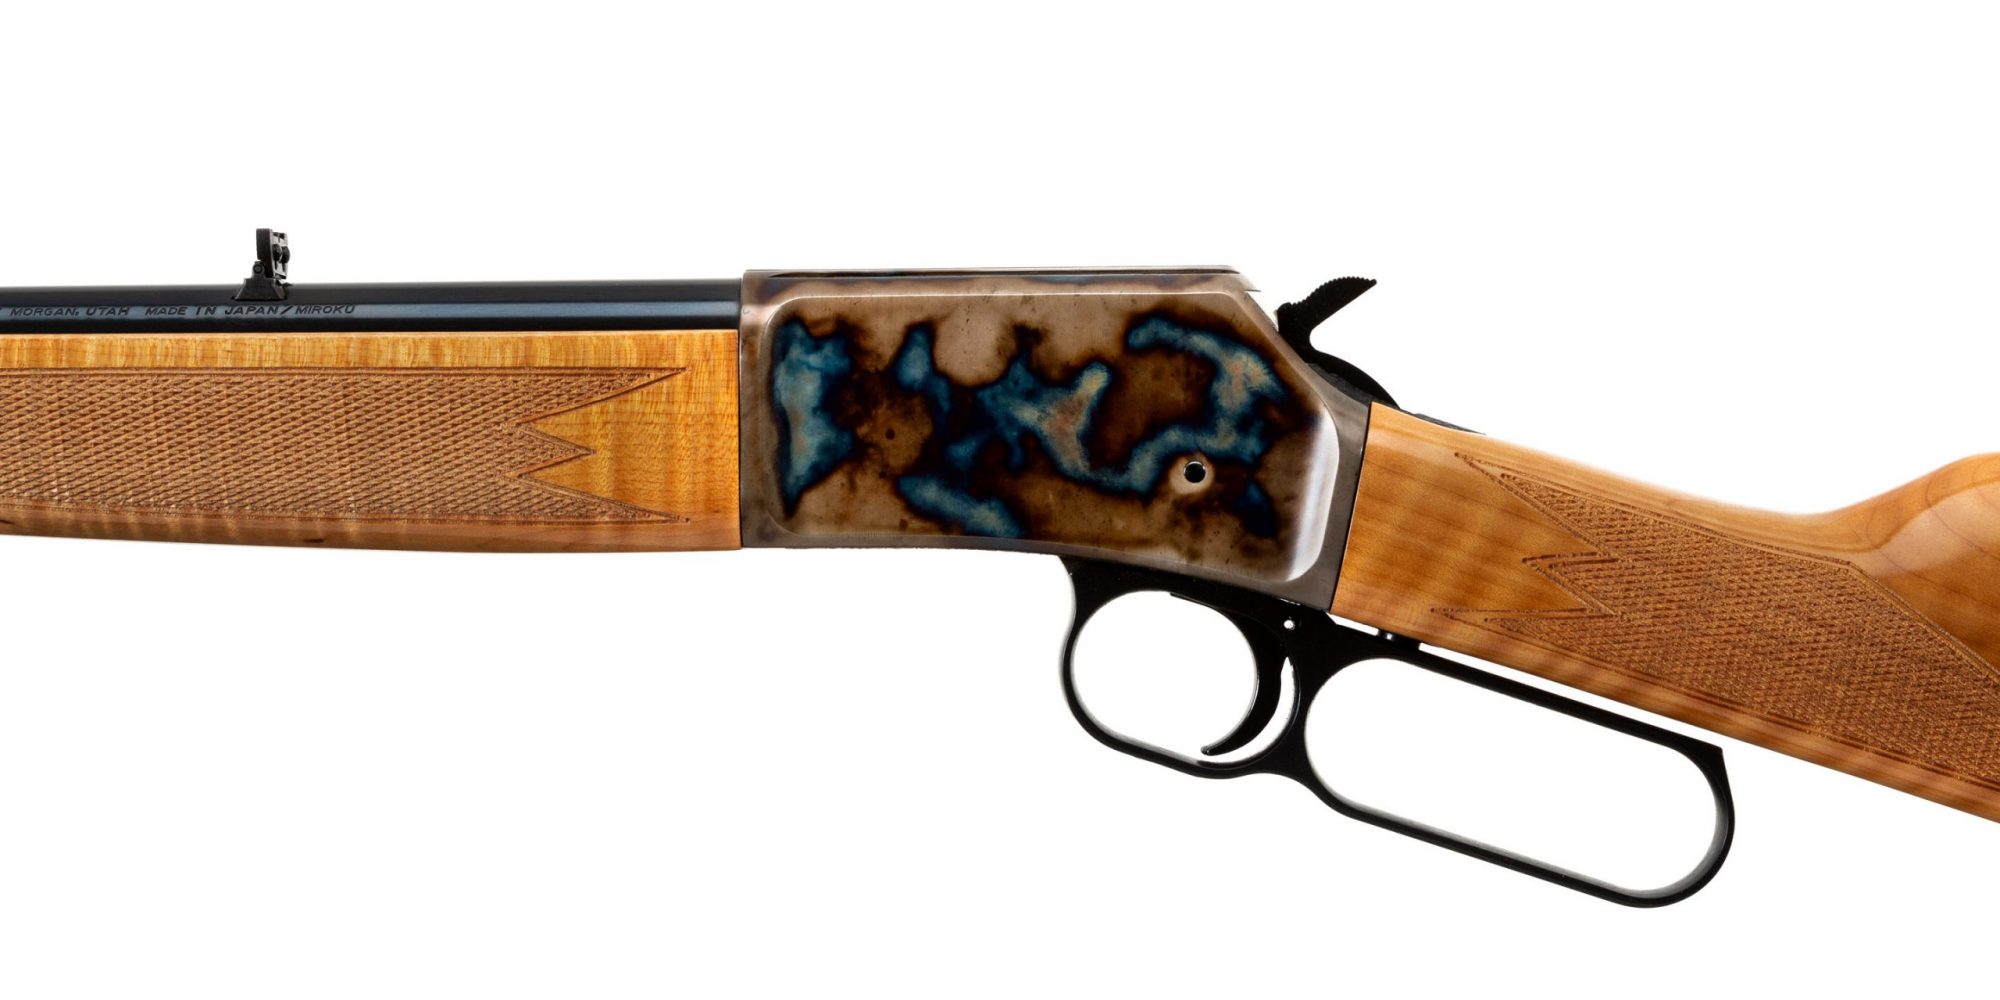 Photo of a Turnbull finished Browning BL-22 with upgraded maple stocks, featuring bone charcoal color case hardening by Turnbull Restoration of Bloomfield, NY